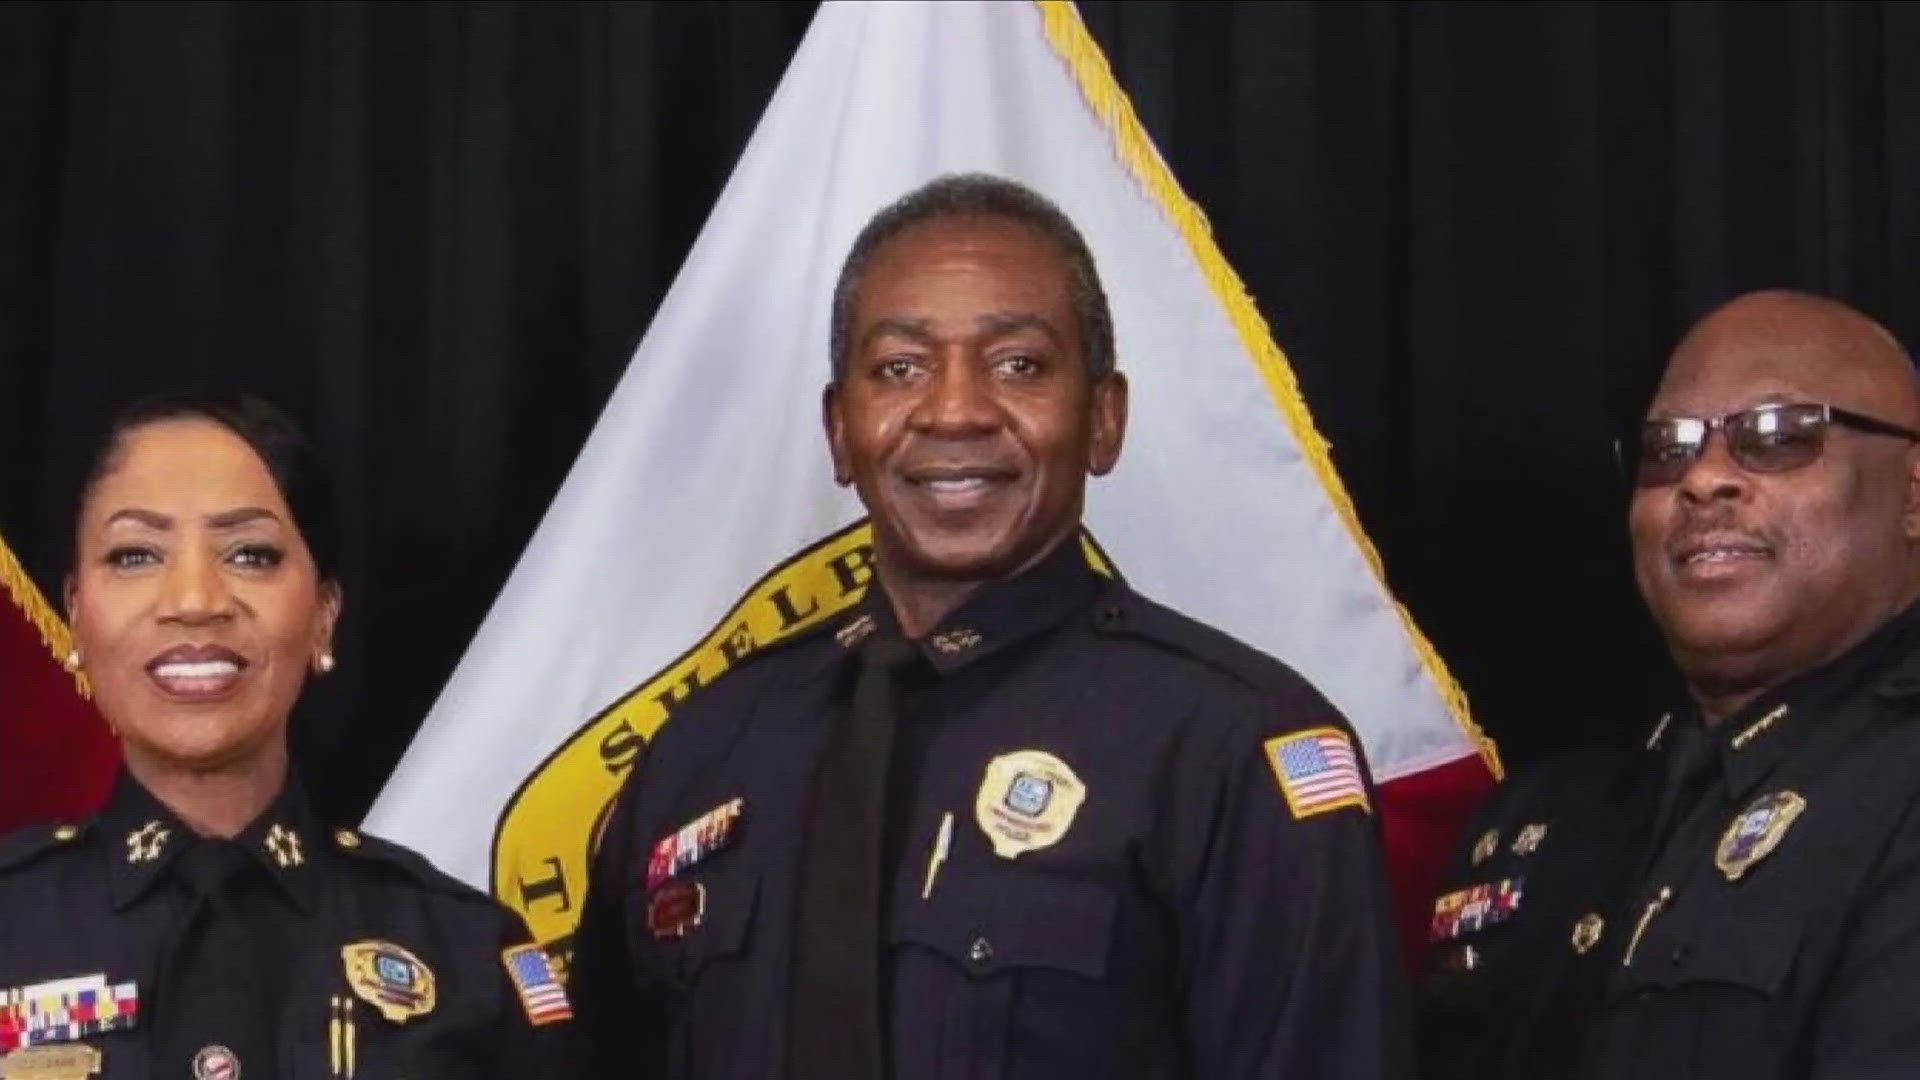 One of the Memphis Police Department’s highest-ranking officials is a resident of the state of Georgia.